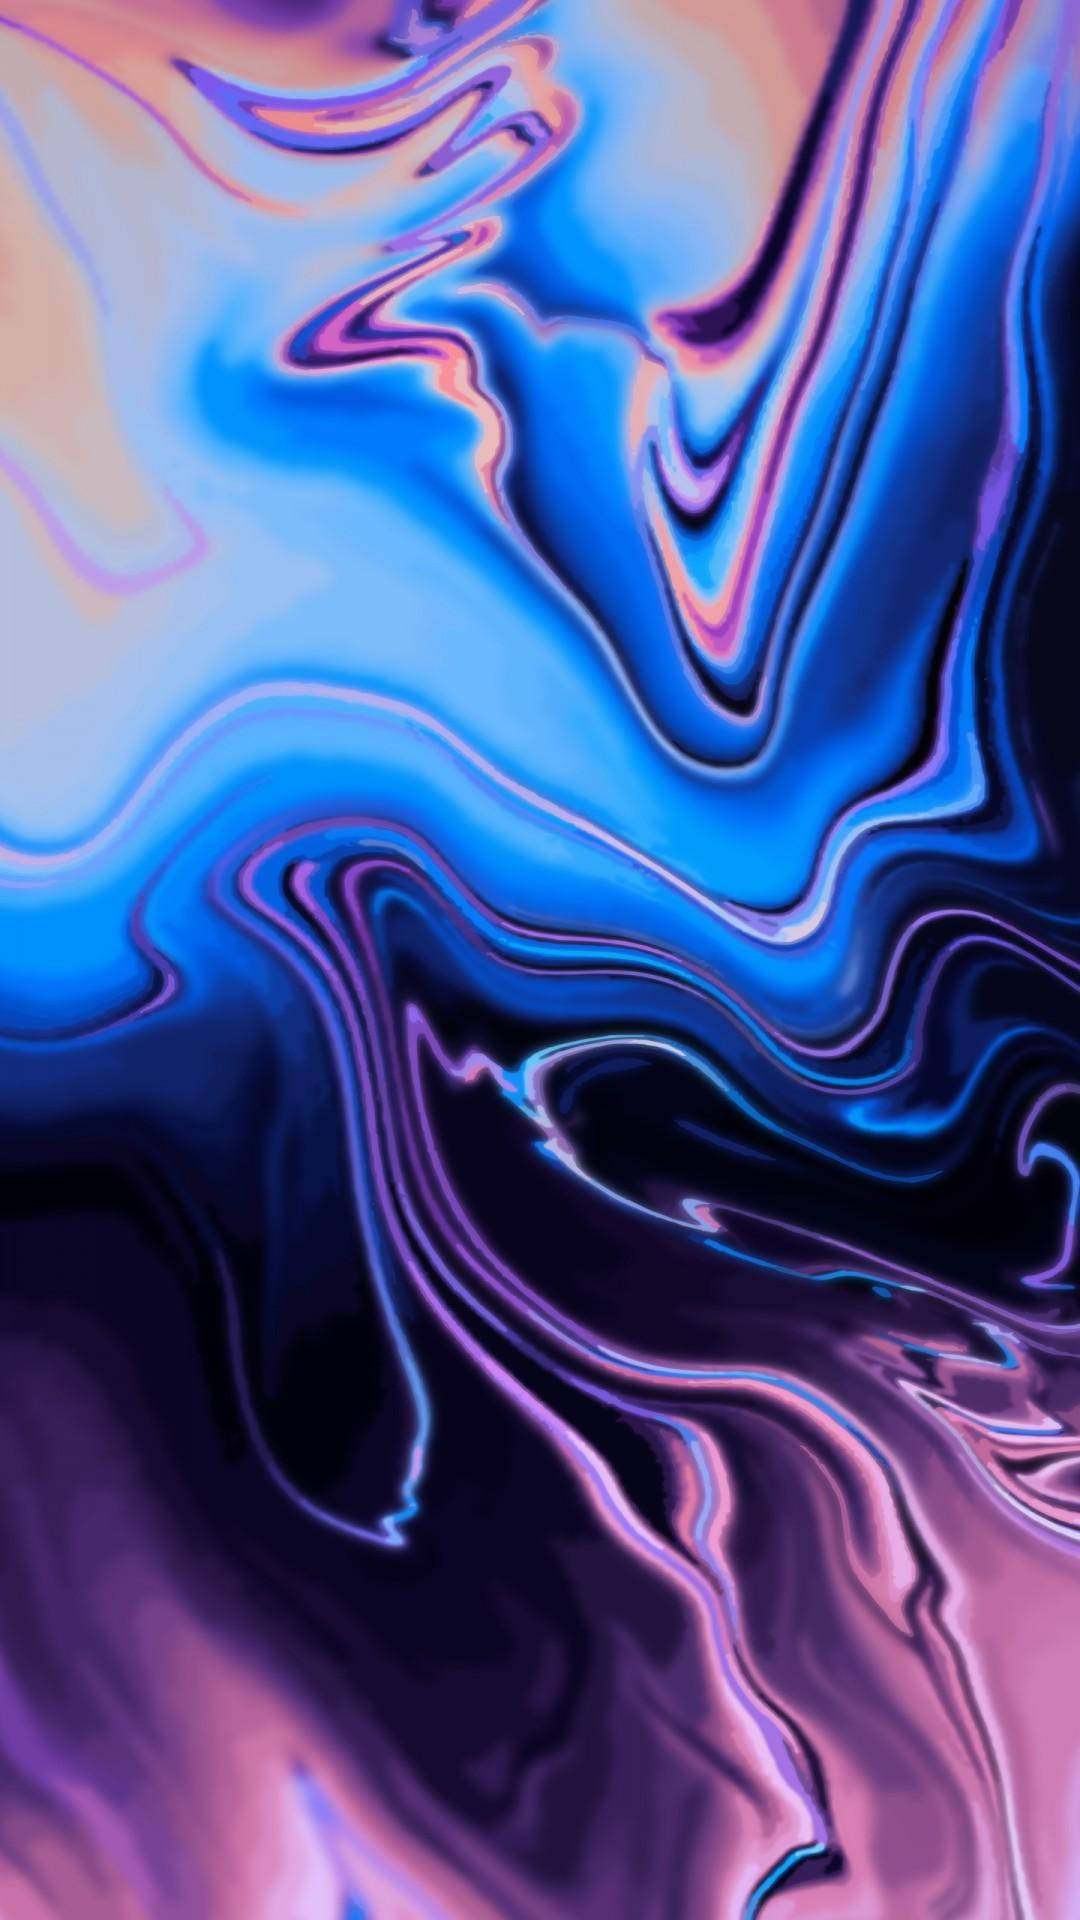 Static Blue And Violet Abstract Background